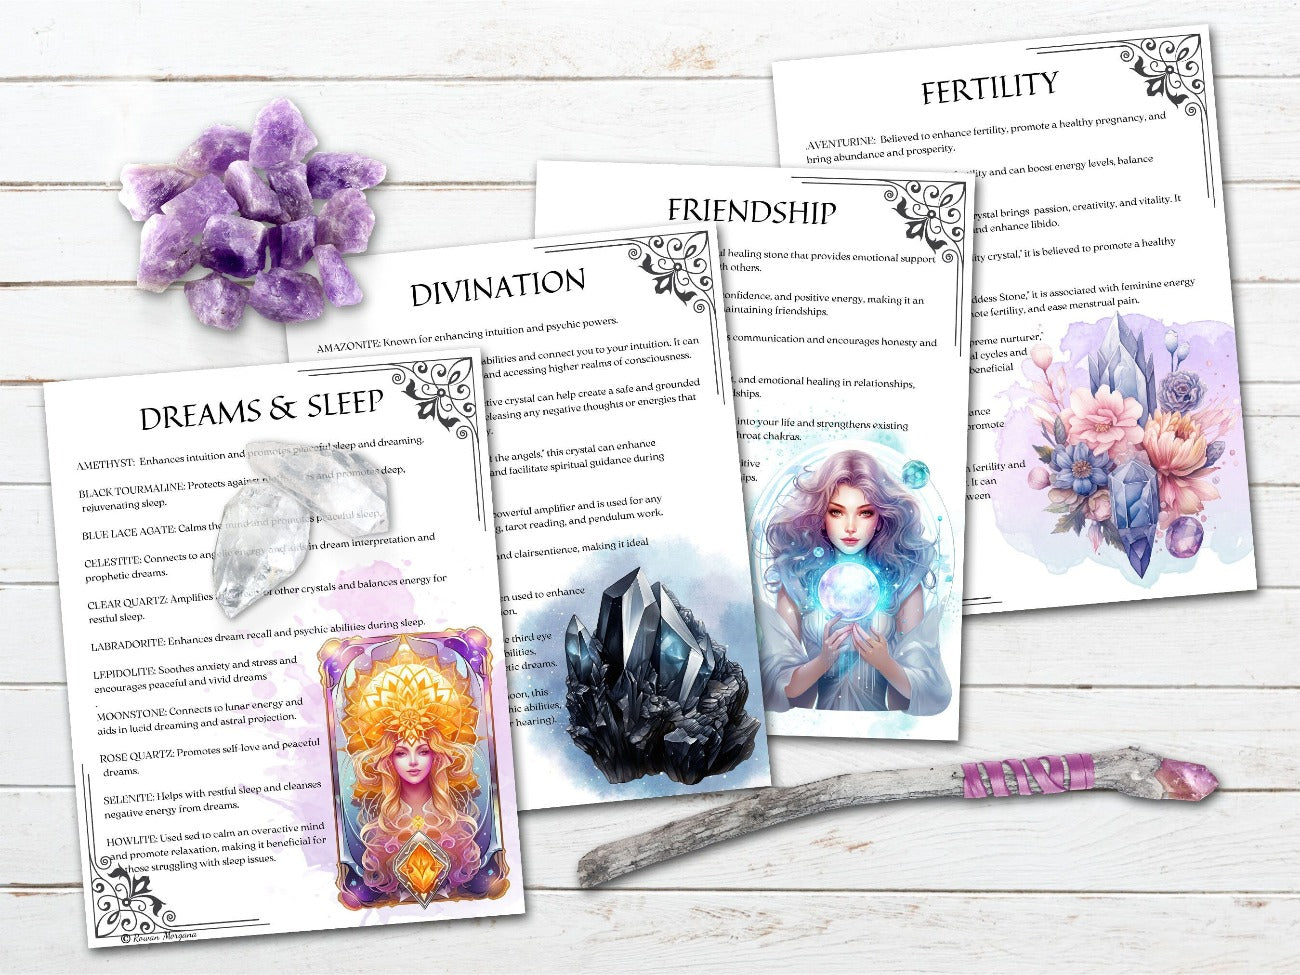 CRYSTAL MAGICK, Dreams, Divination Friendship, & Fertility Printable pages - Morgana Magick Spell